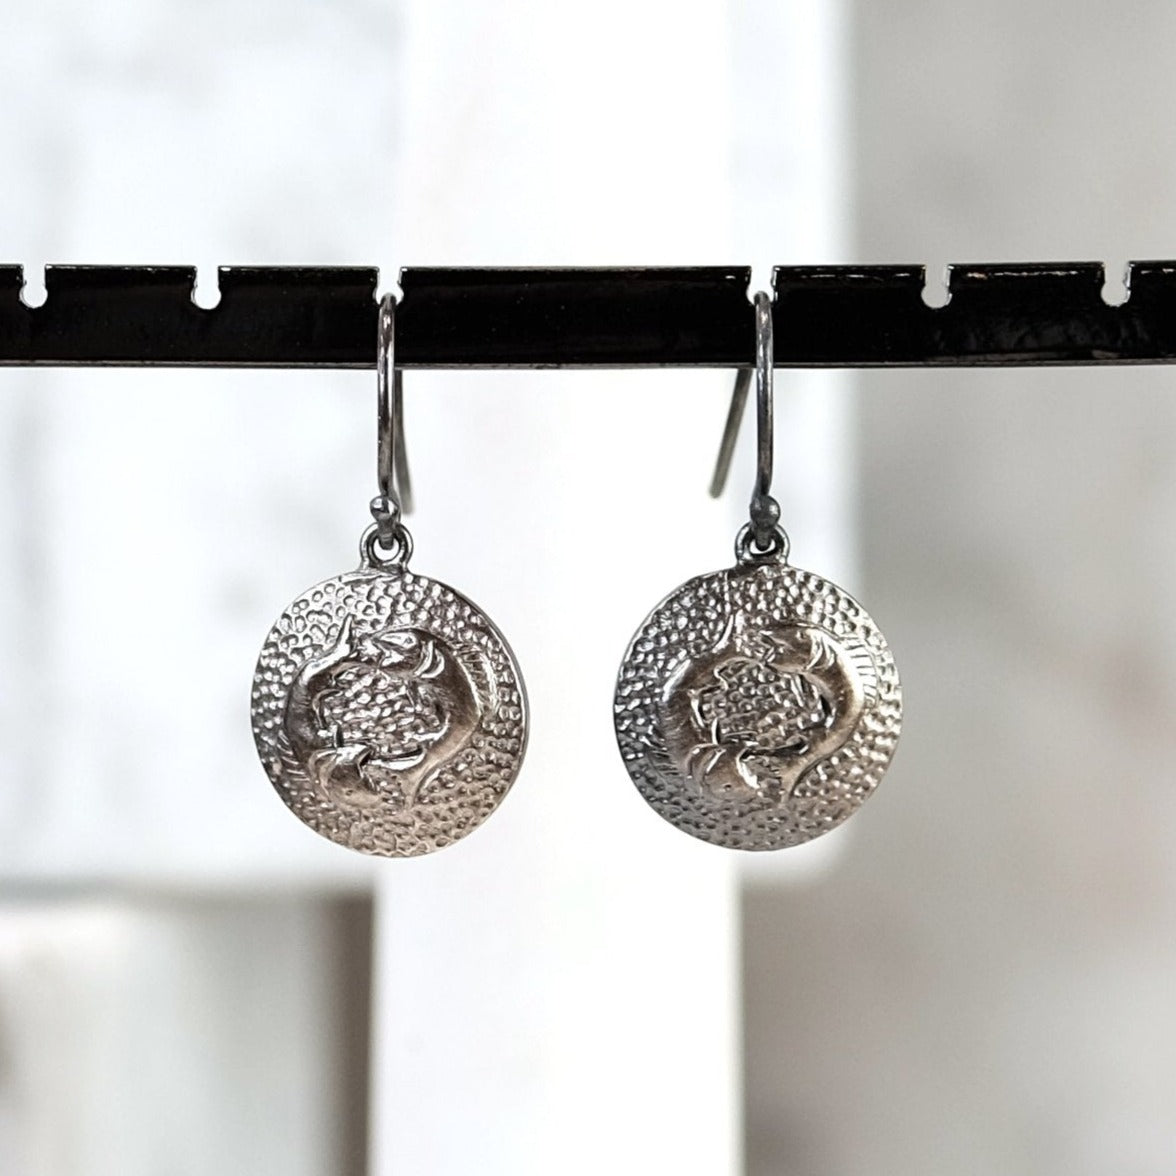 The Madstone Pisces earrings